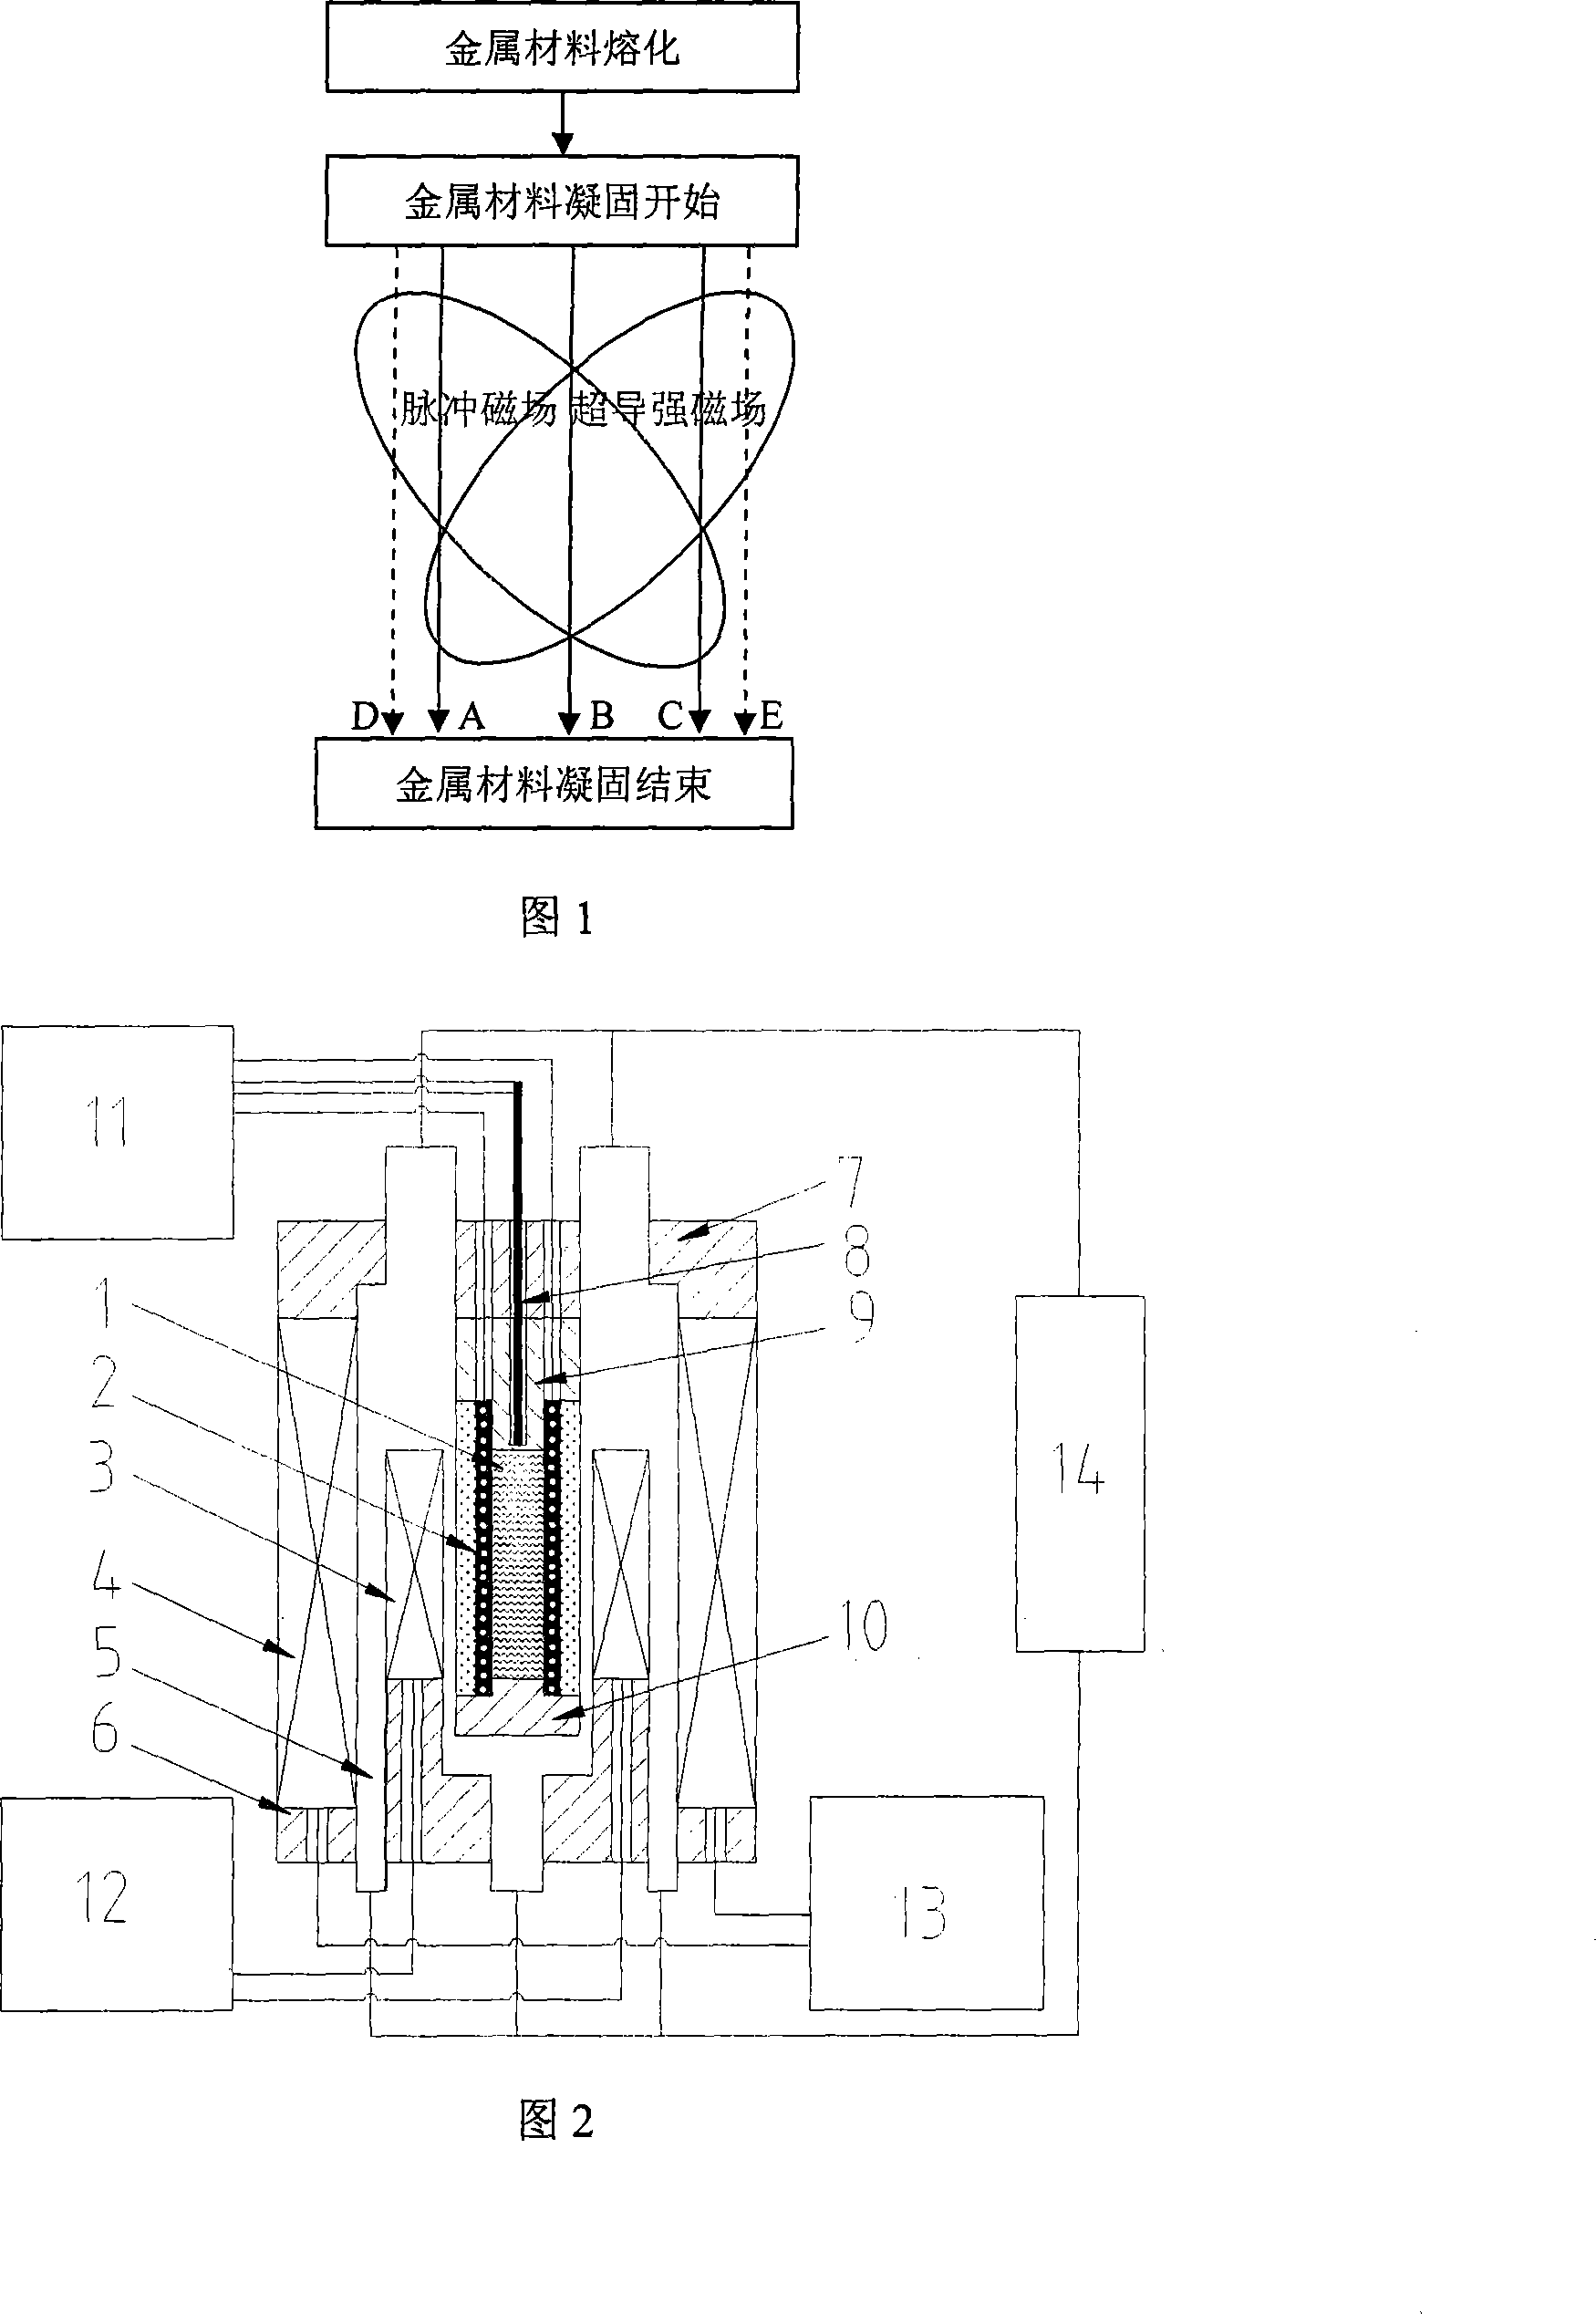 A method and apparatus for processing metallic material within complex magnetic field